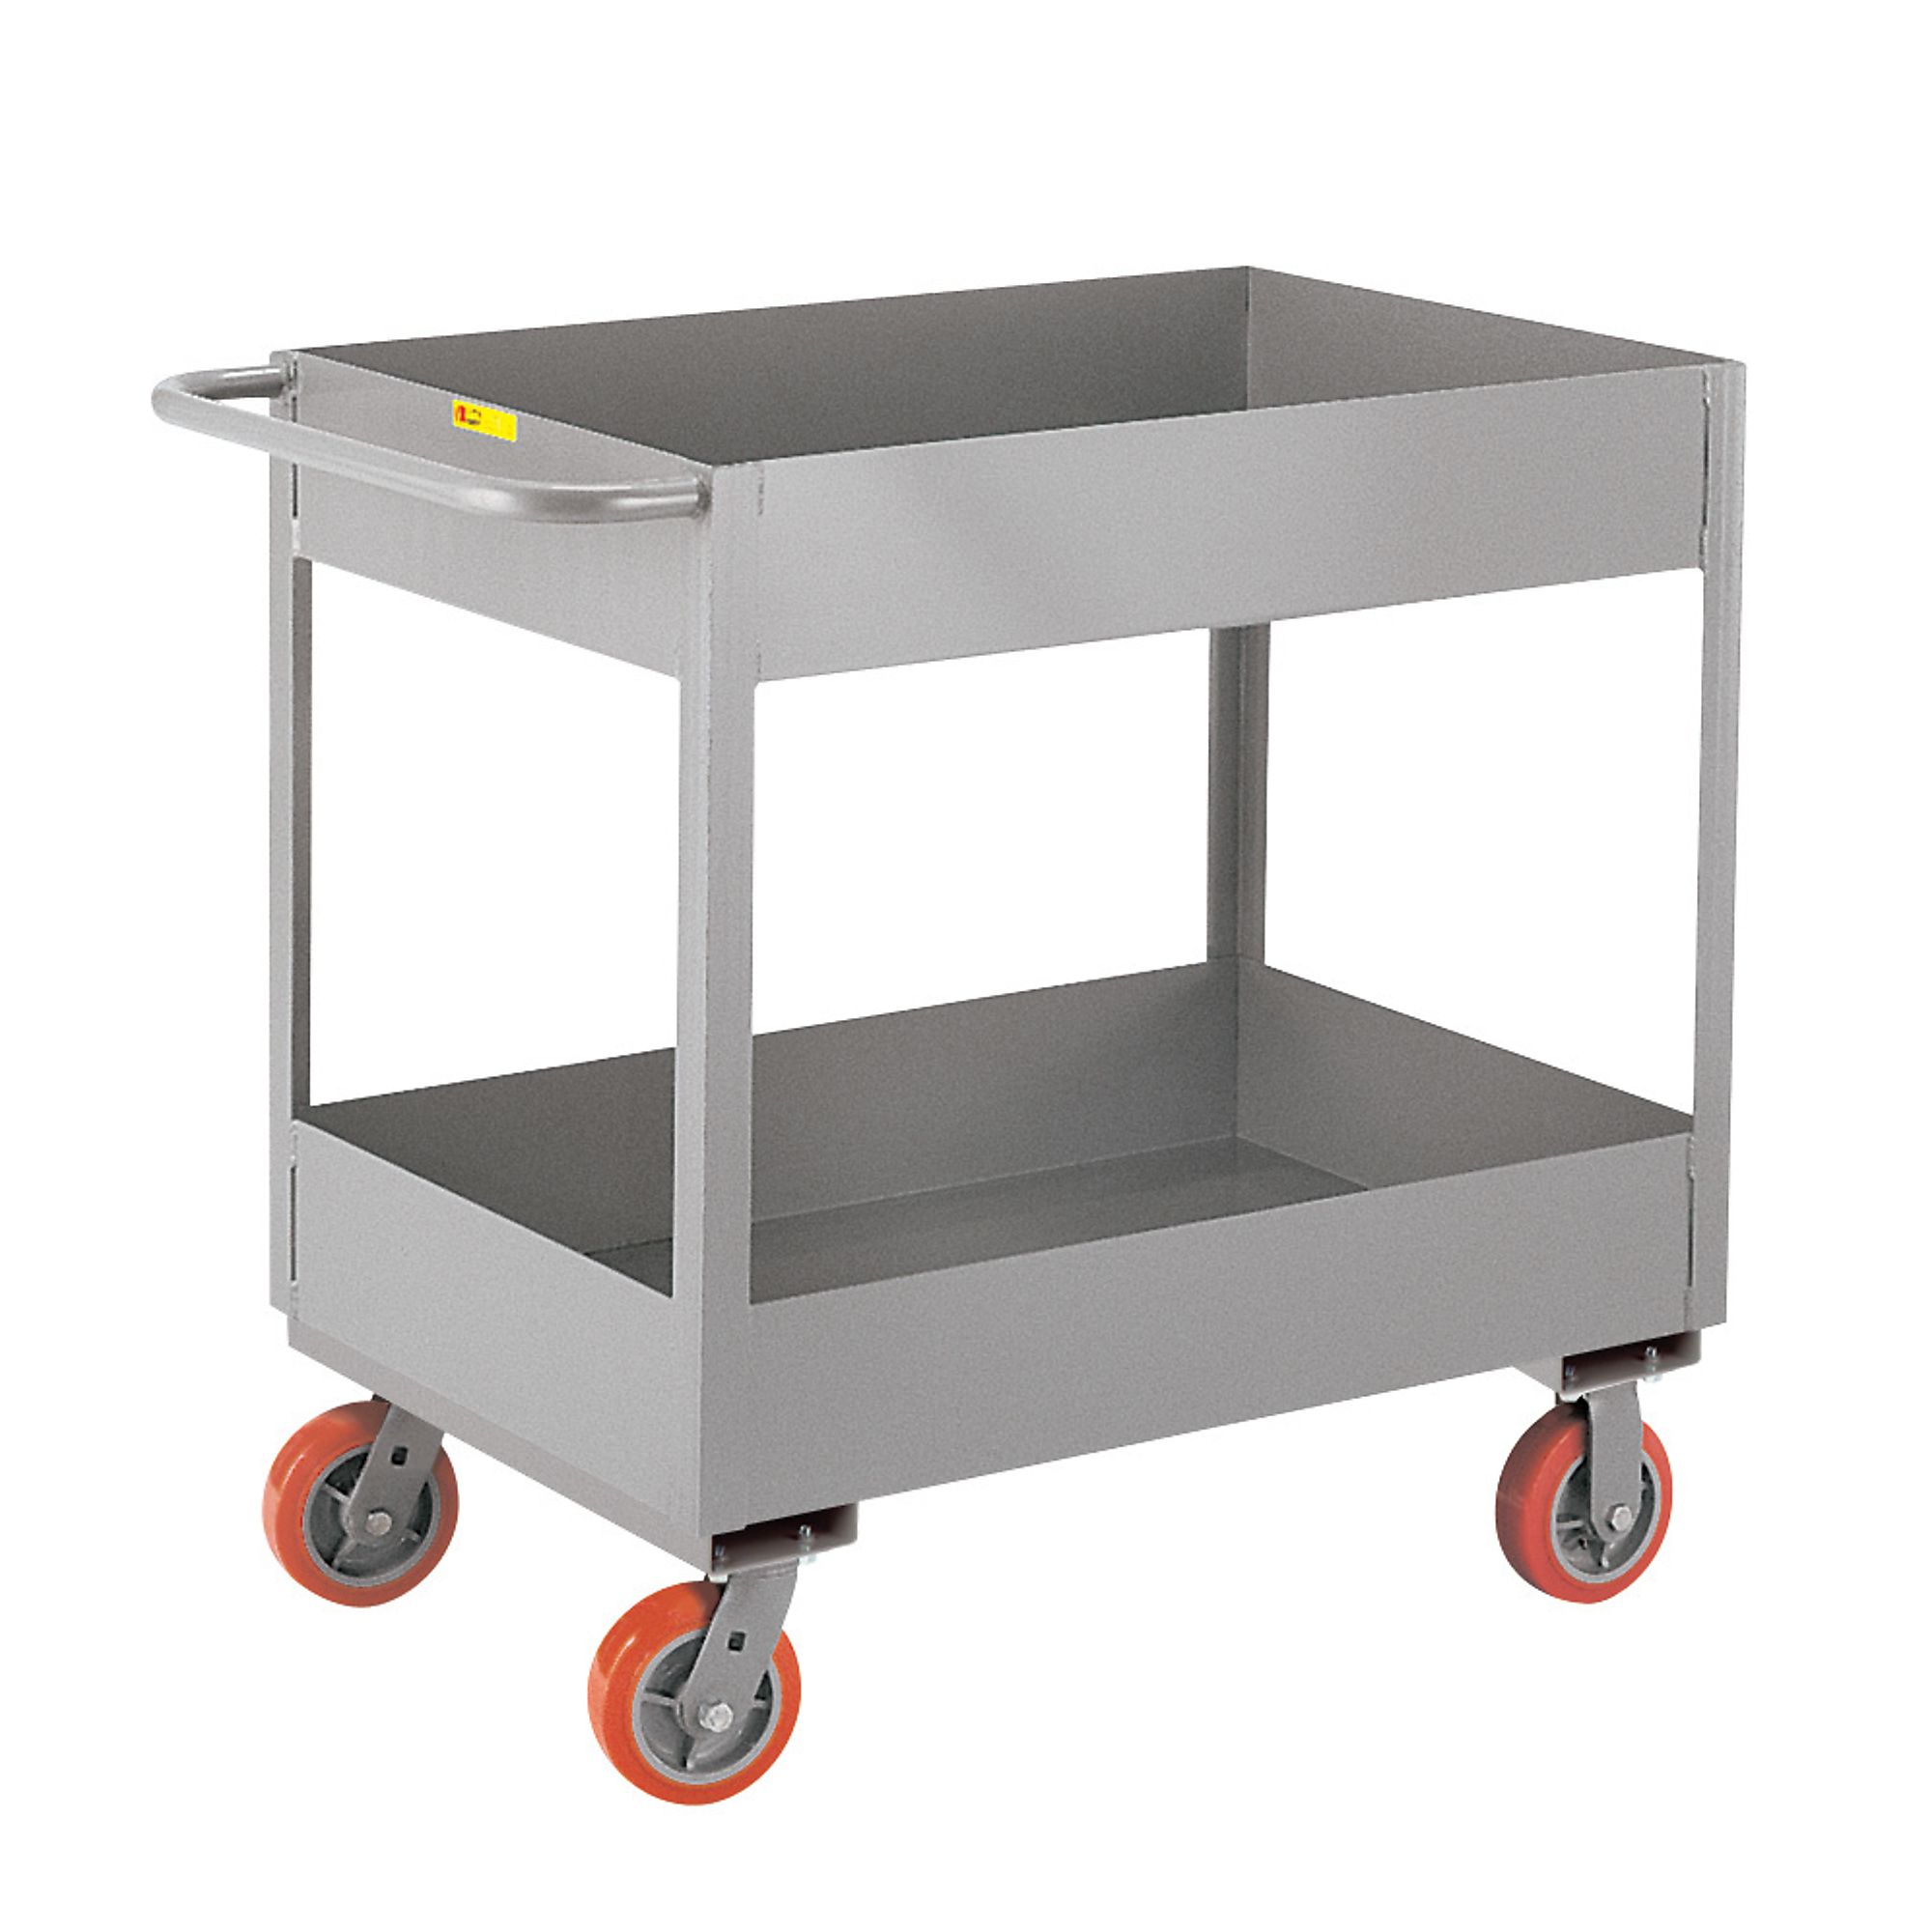 Little Giant, 6Inch Deep Shelf Truck, 24x48, 3600 lbs, Total Capacity 3600 lb, Shelves (qty.) 2, Material Carbon Steel, Model DS2448X6-6PY